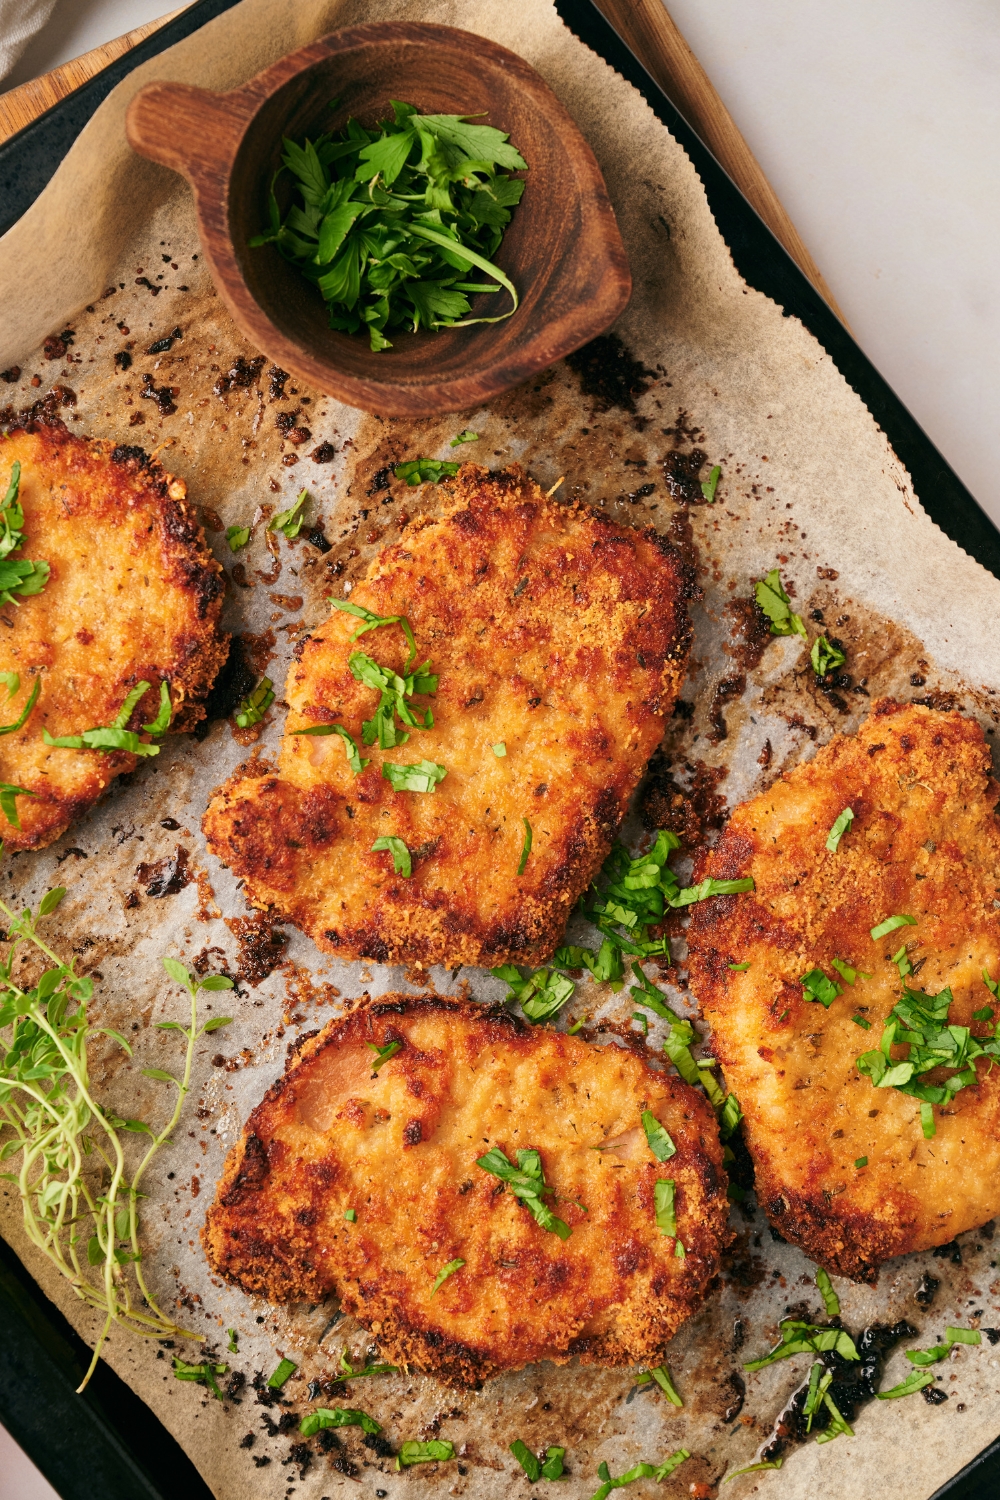 Four freshly baked and breaded pork chops on a baking sheet lined with parchment paper. Each is garnished with fresh green herbs.